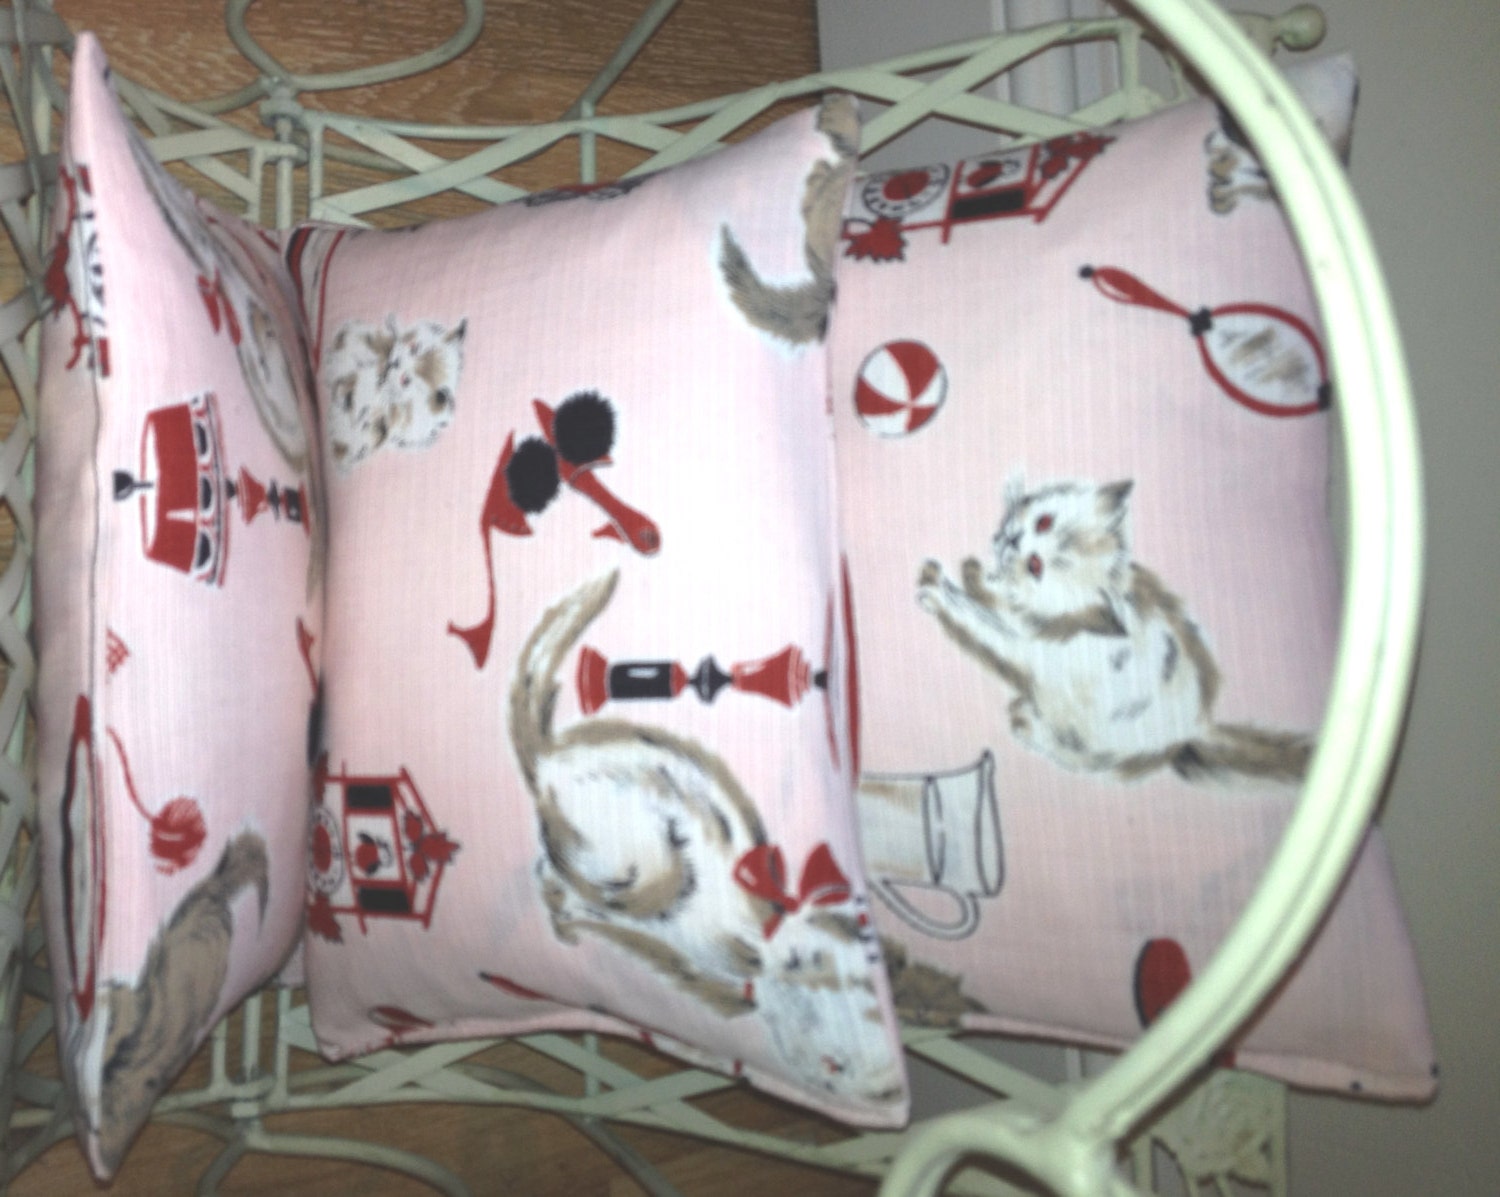 Vintage Kitten Fabric Pink, Handmade Embroidery Stitched Throw Cushions